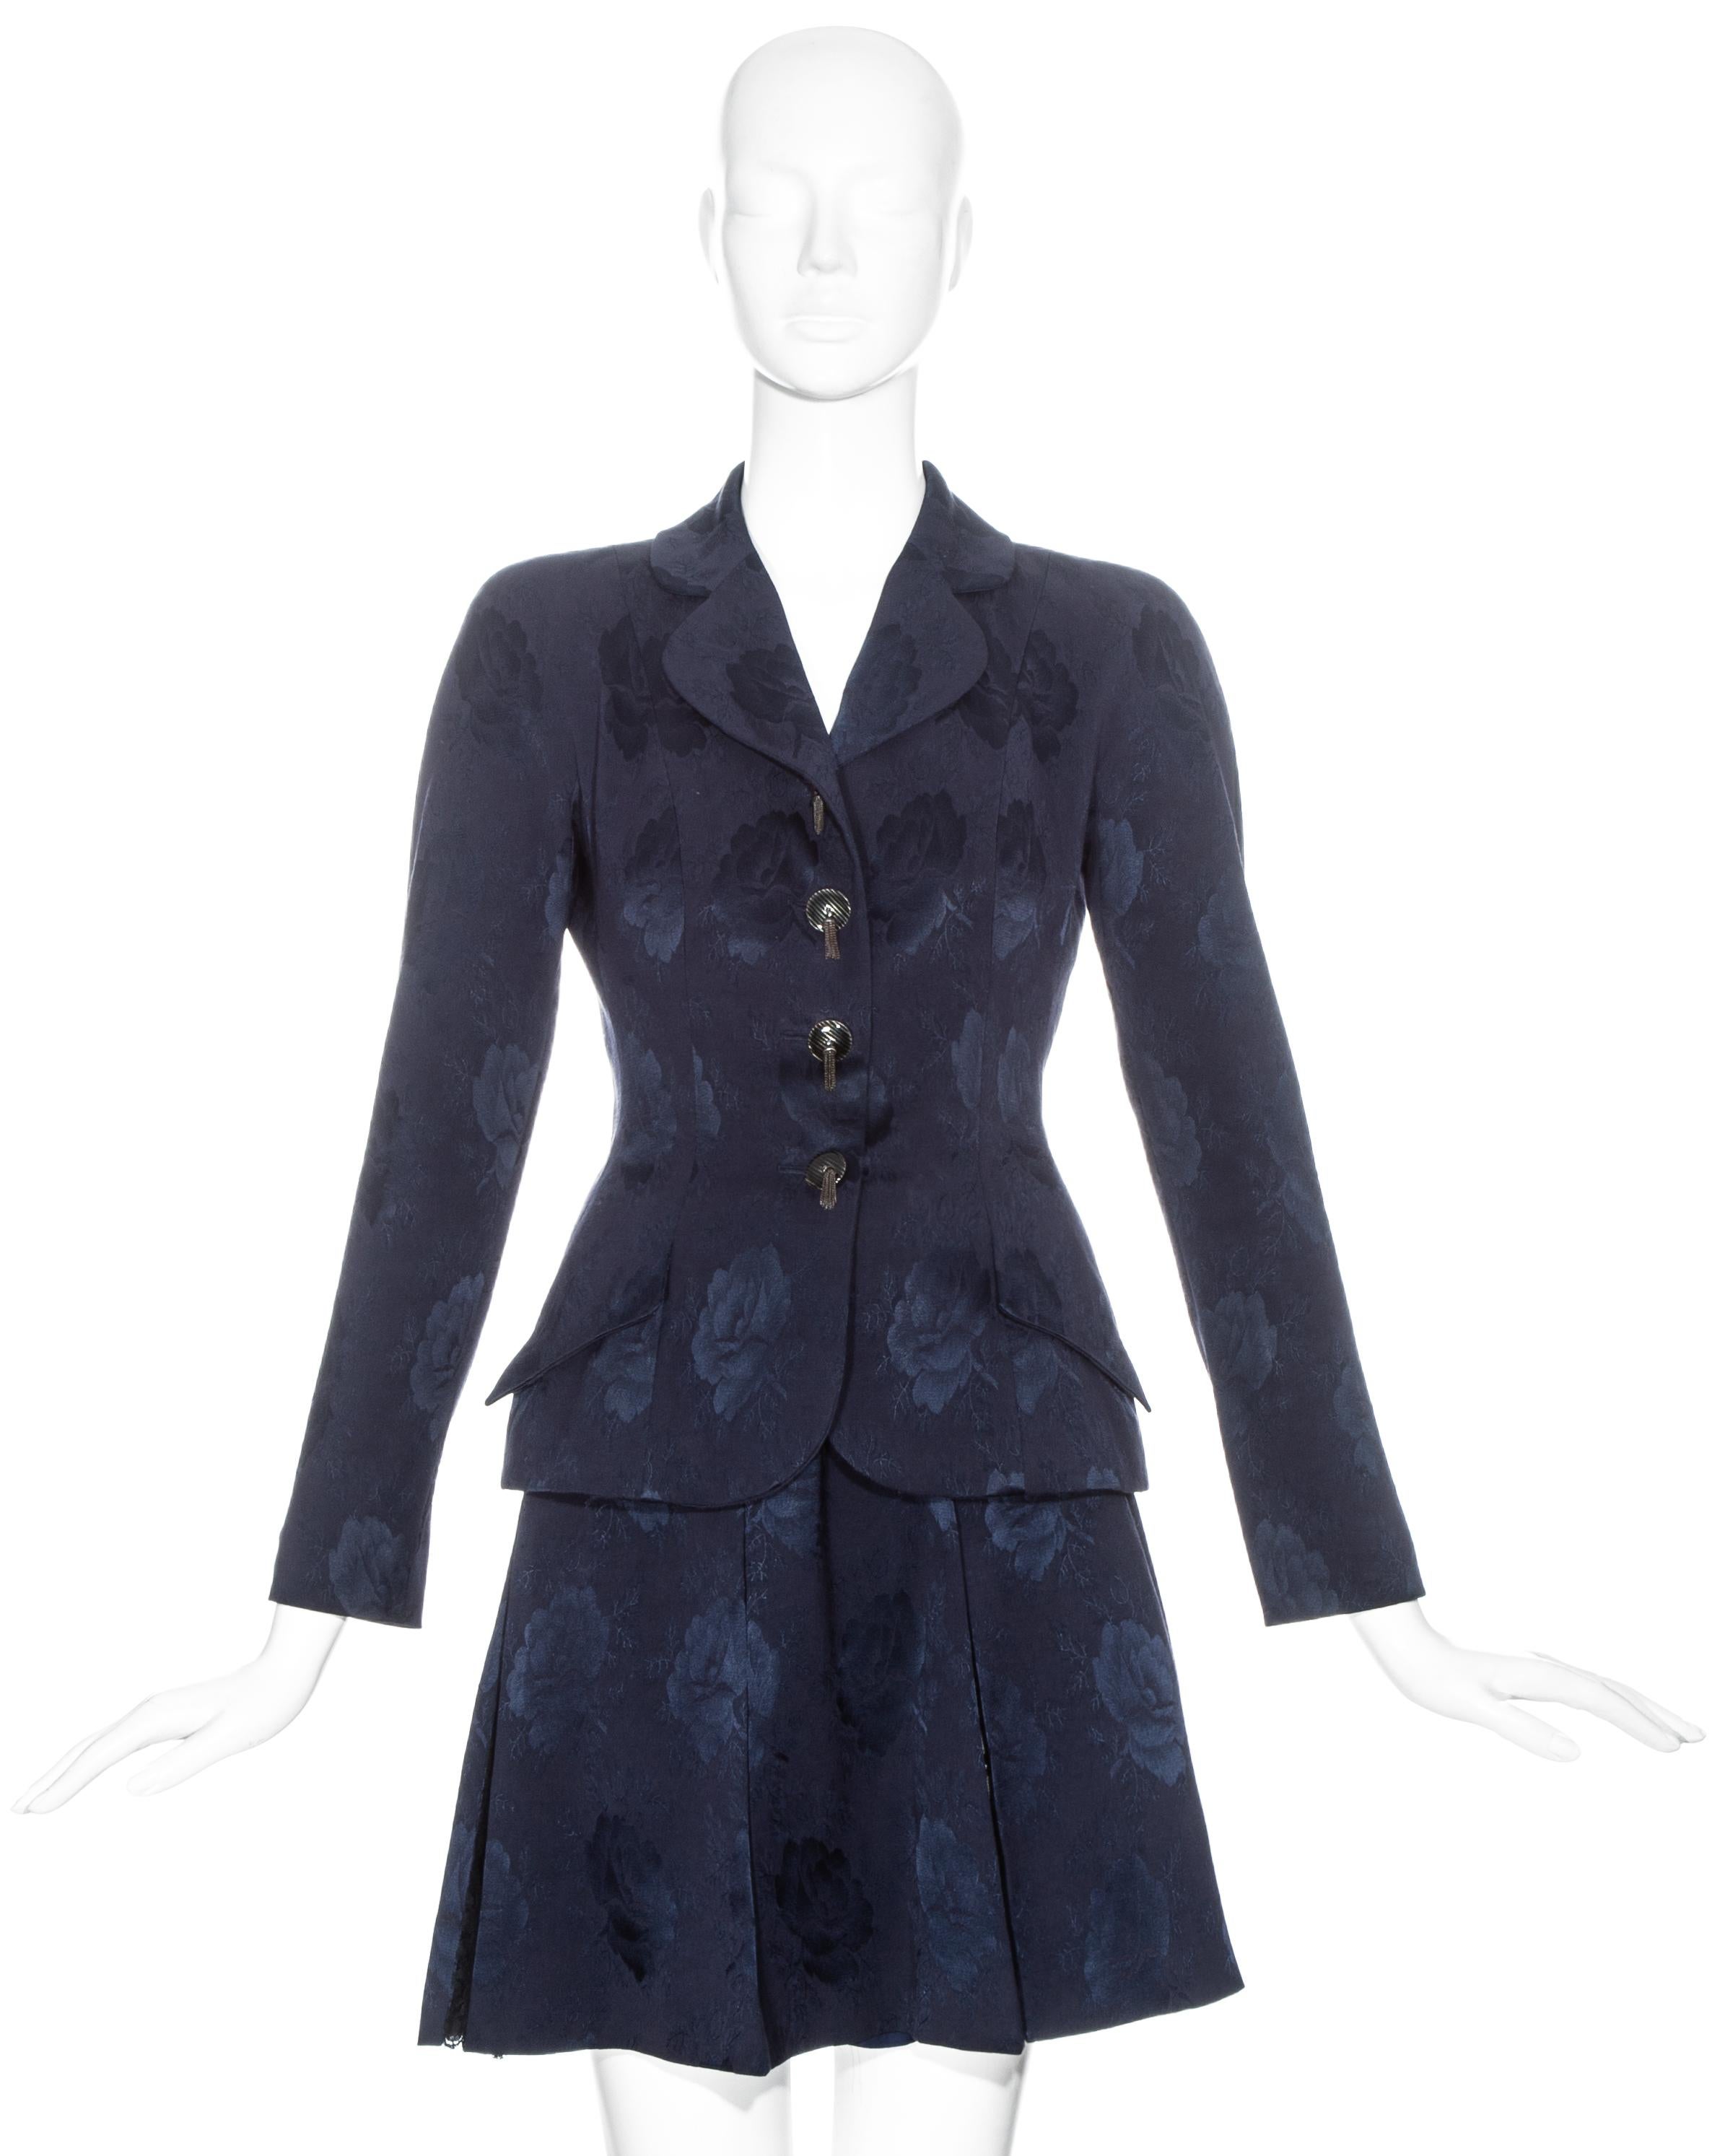 Christian Dior by John Galliano navy floral silk brocade skirt suit comprising: fitted blazer jacket with metal tasseled buttons, two flap pockets and notched lapel, and pleated mini skirt with black lace underlay and zip fastening. 

Fall-Winter